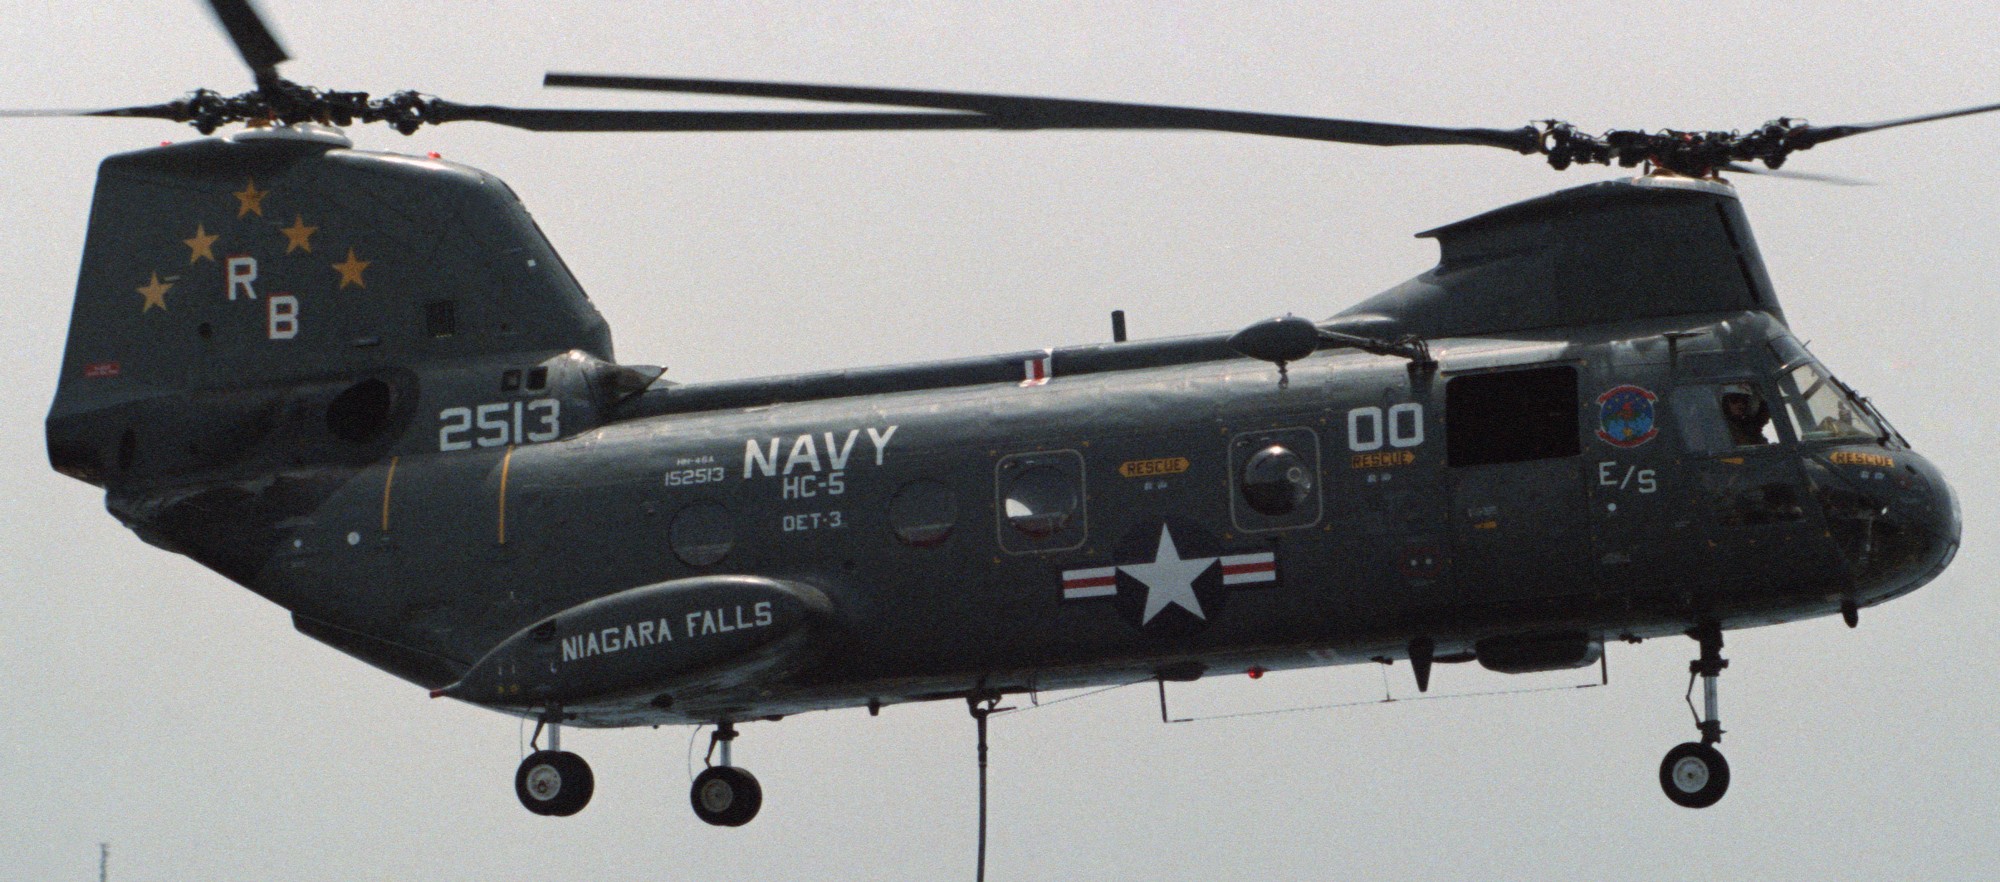 hc-5 providers helicopter combat support squadron navy hh-46a sea knight 56